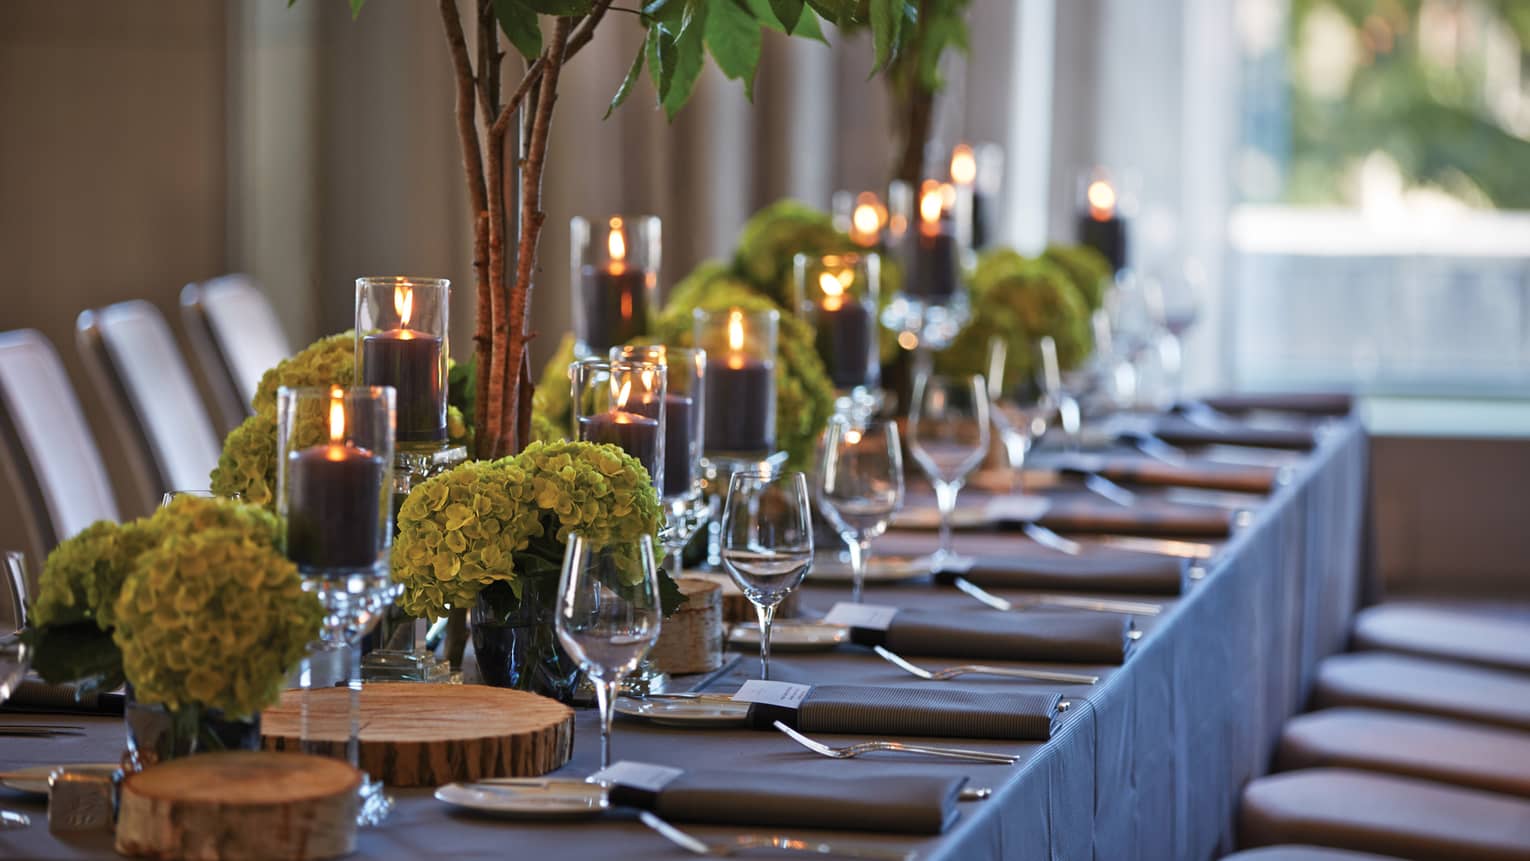 Black pillar candles in votives, green flowers, wine glasses along banquet table